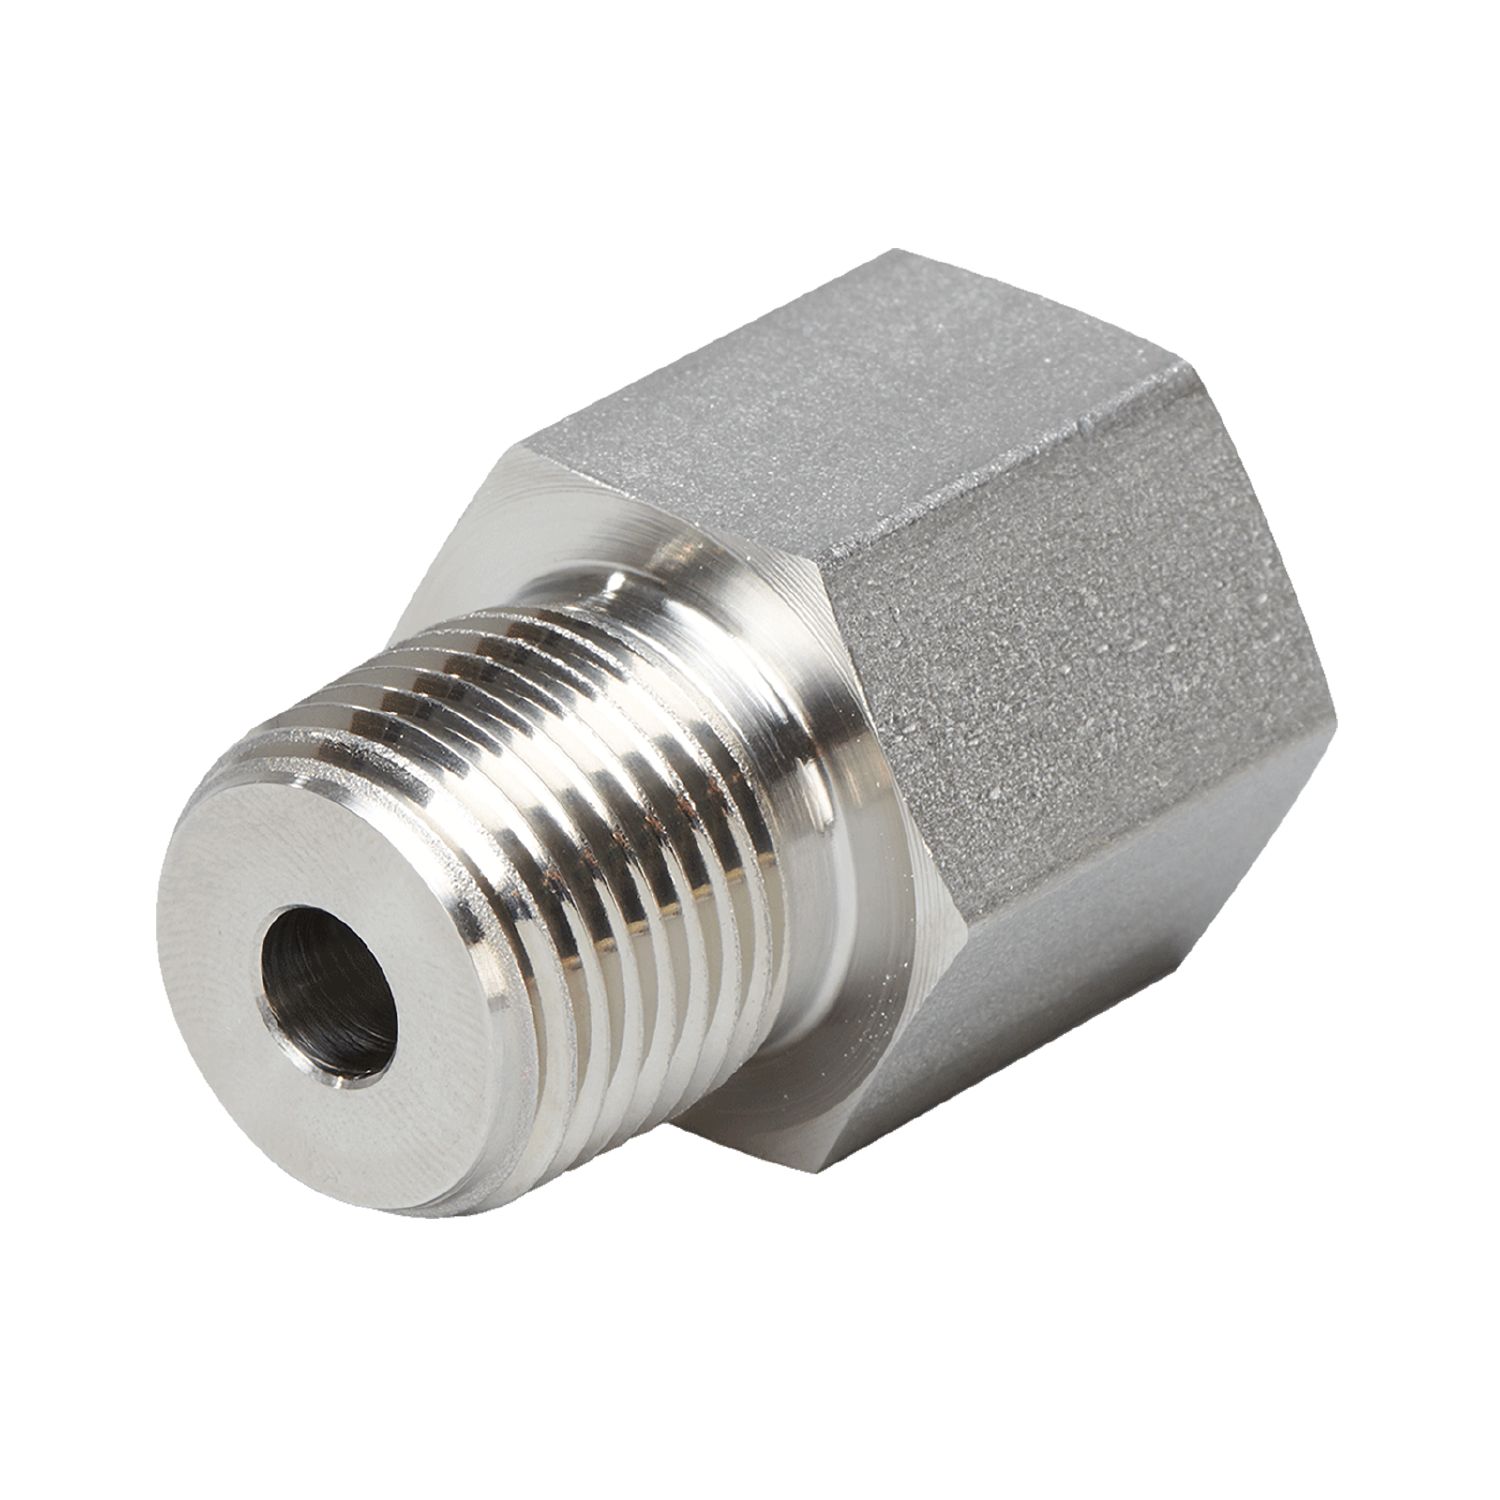 UP0021 - Screw-in adapter for process sensors - ifm